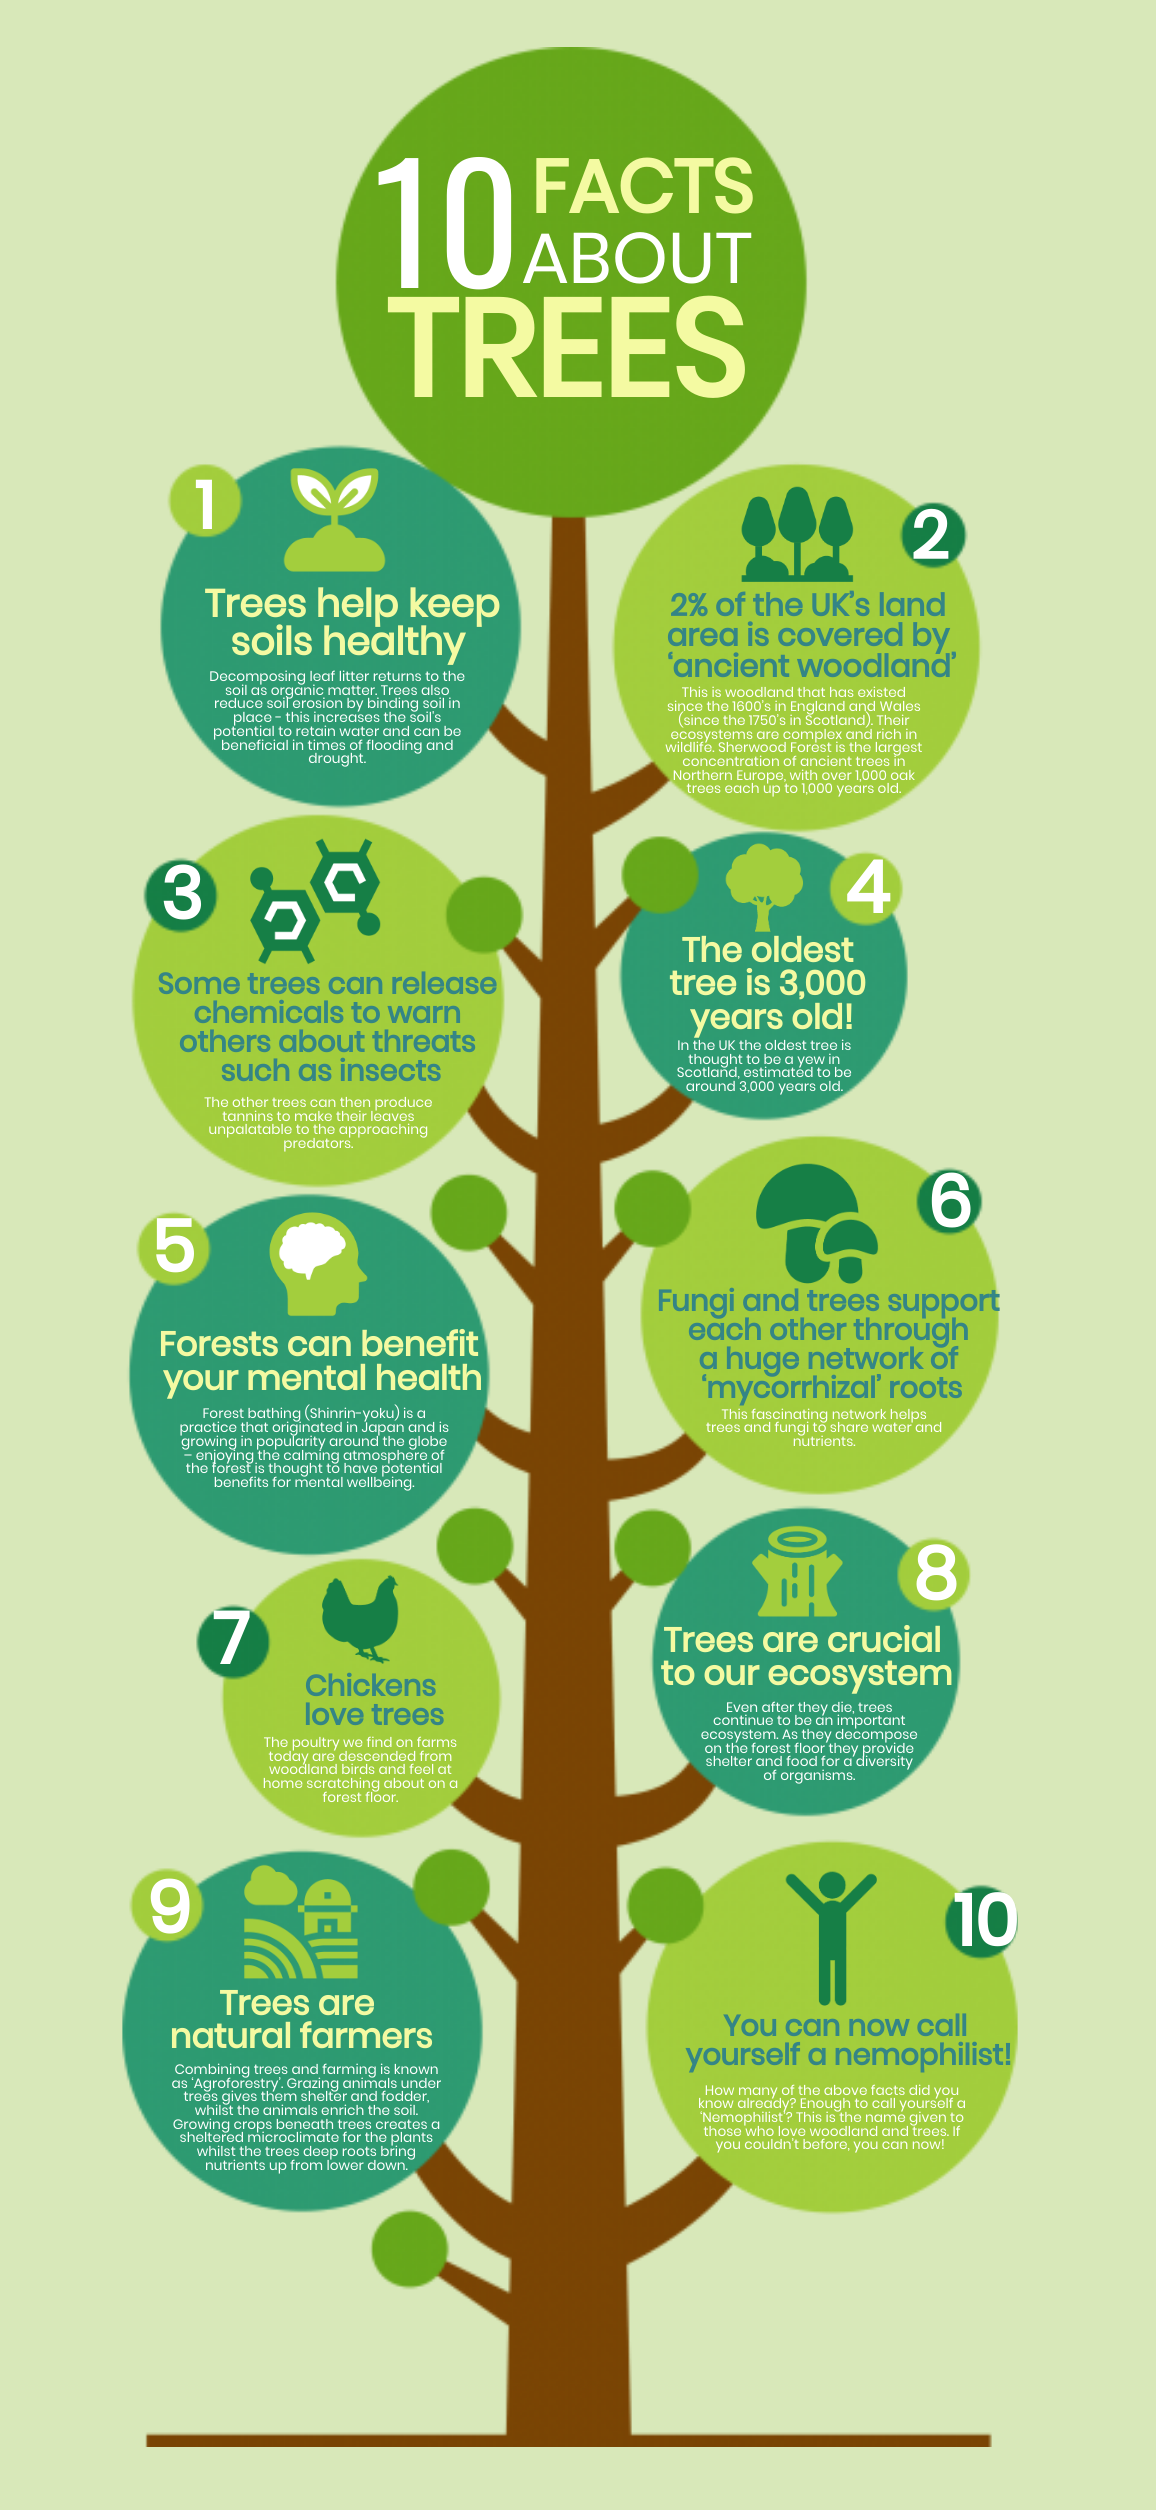 facts about trees infographic - Simple Infographic Maker Tool by Easelly